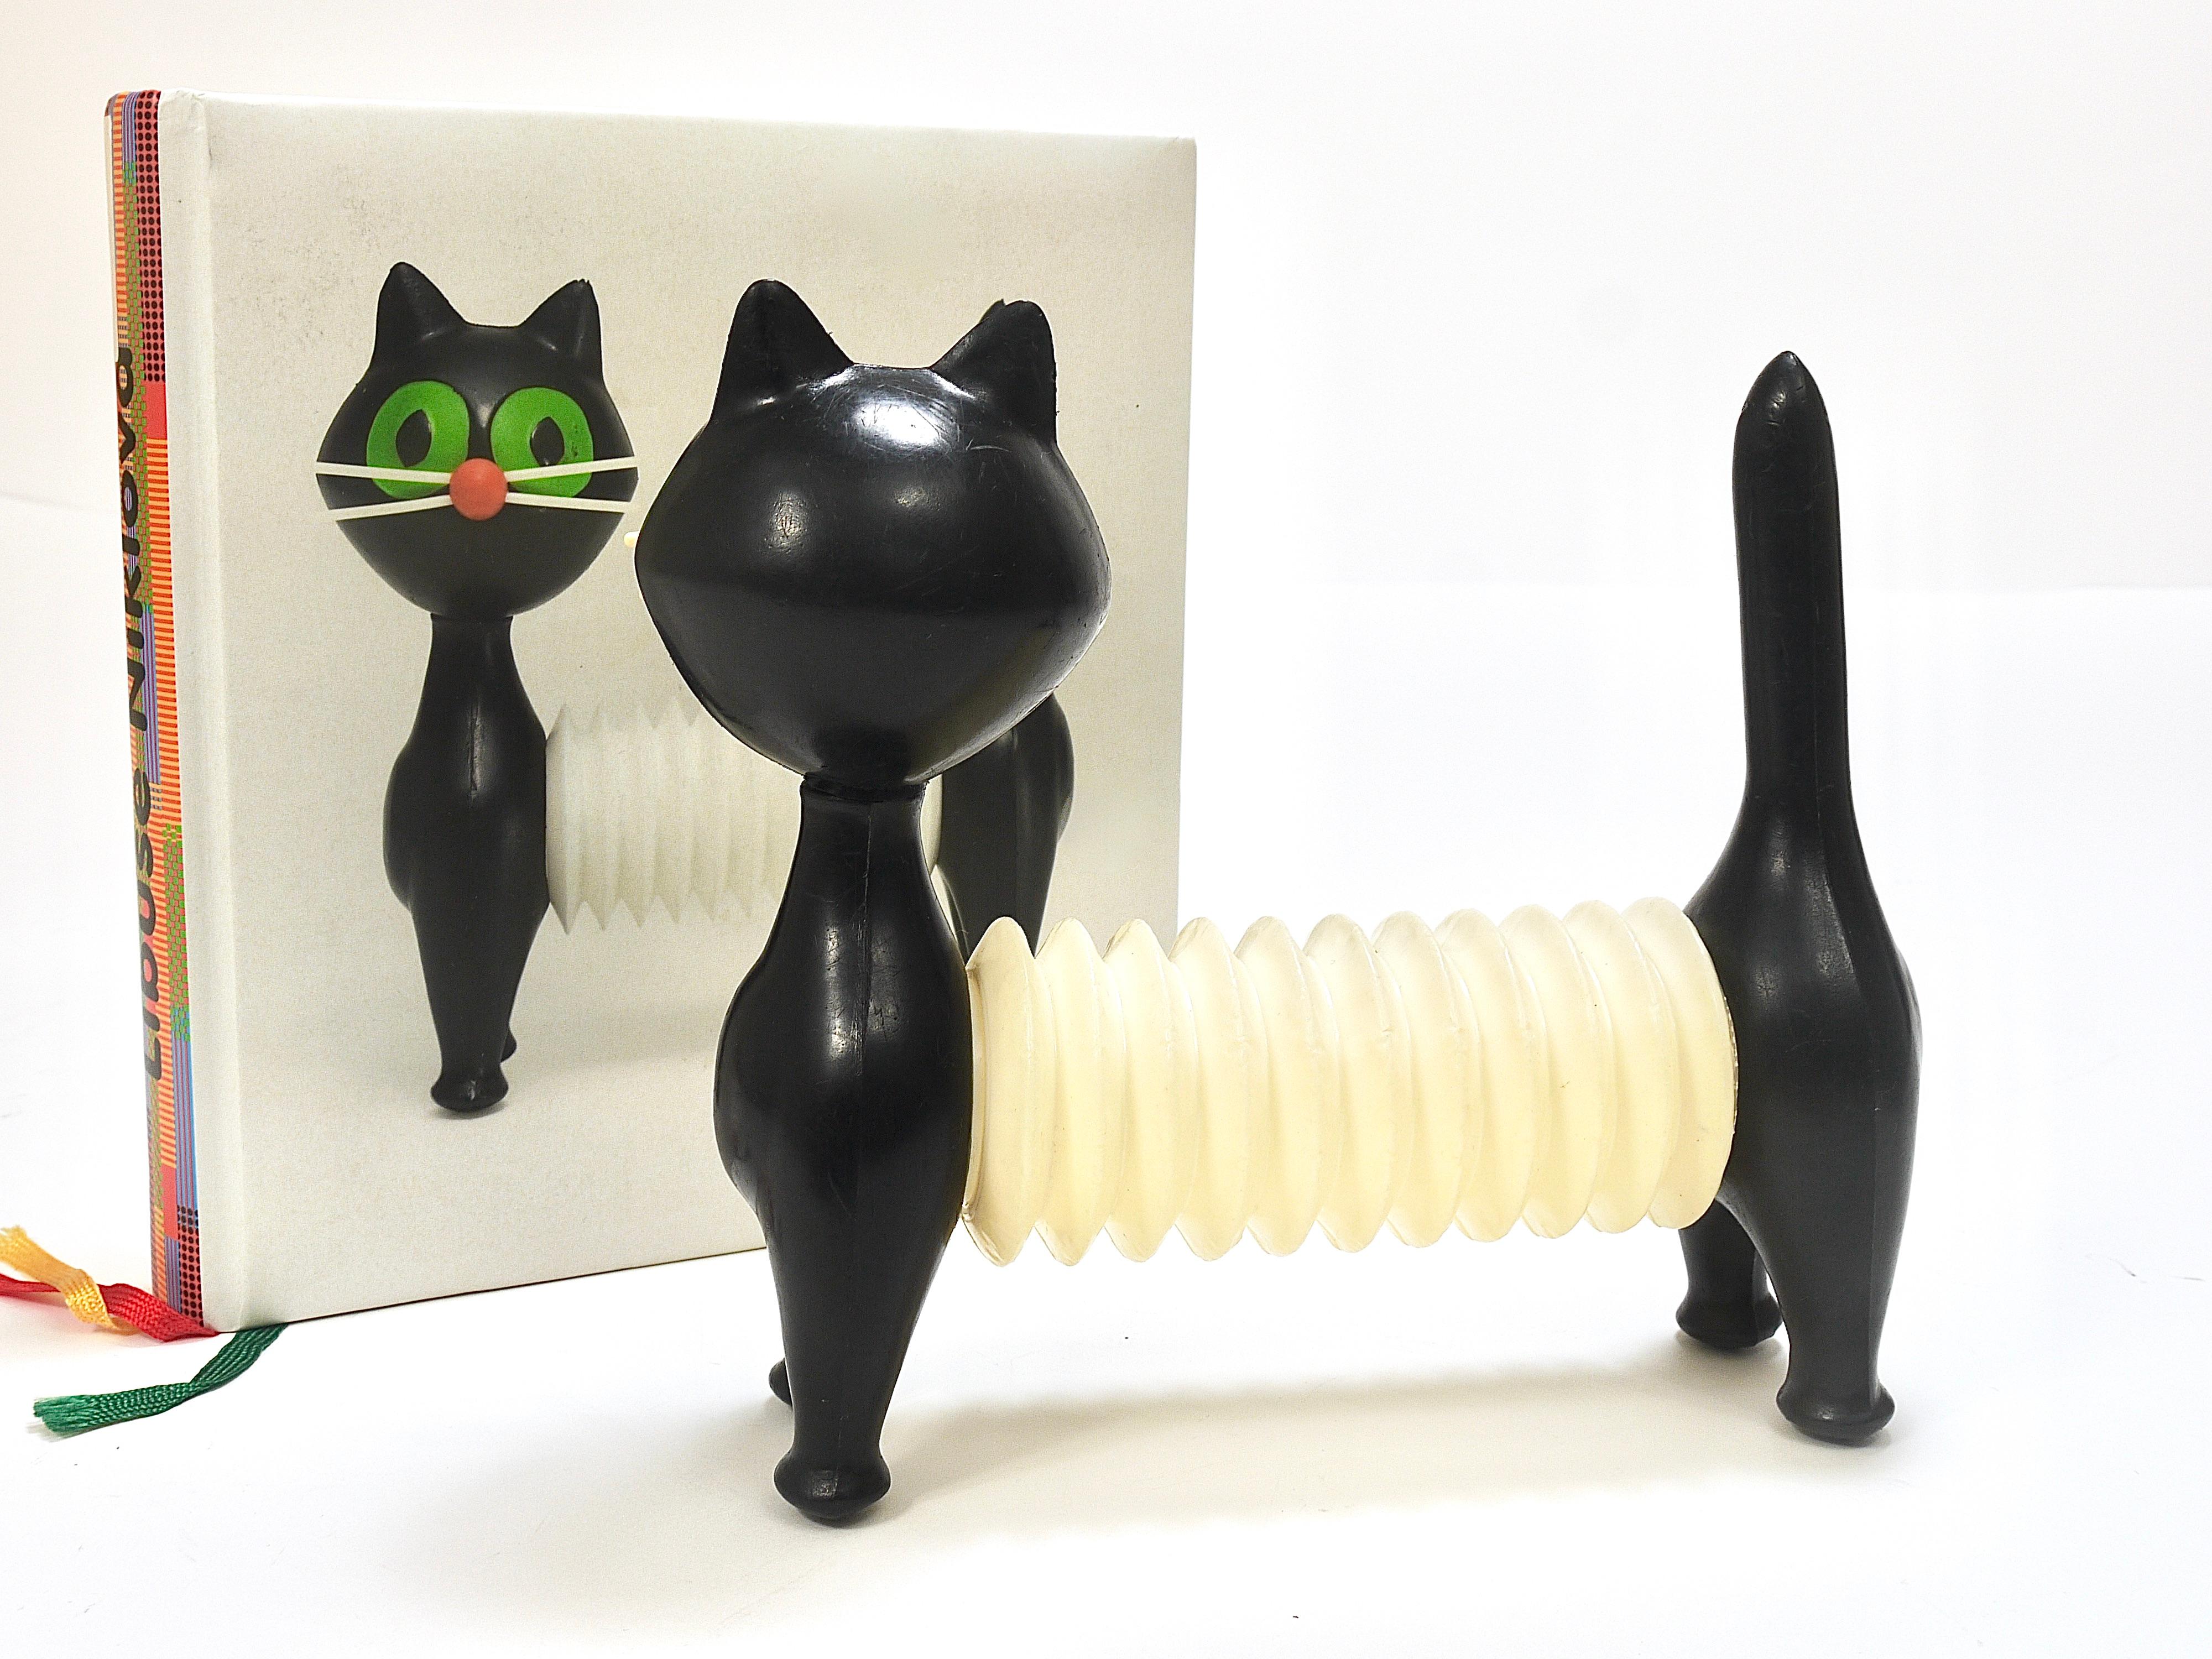 Libuse Niklova Accordion Squeaky Toy Cat „Tomcat“ by Fatra, Czechoslovakia 1960s For Sale 12